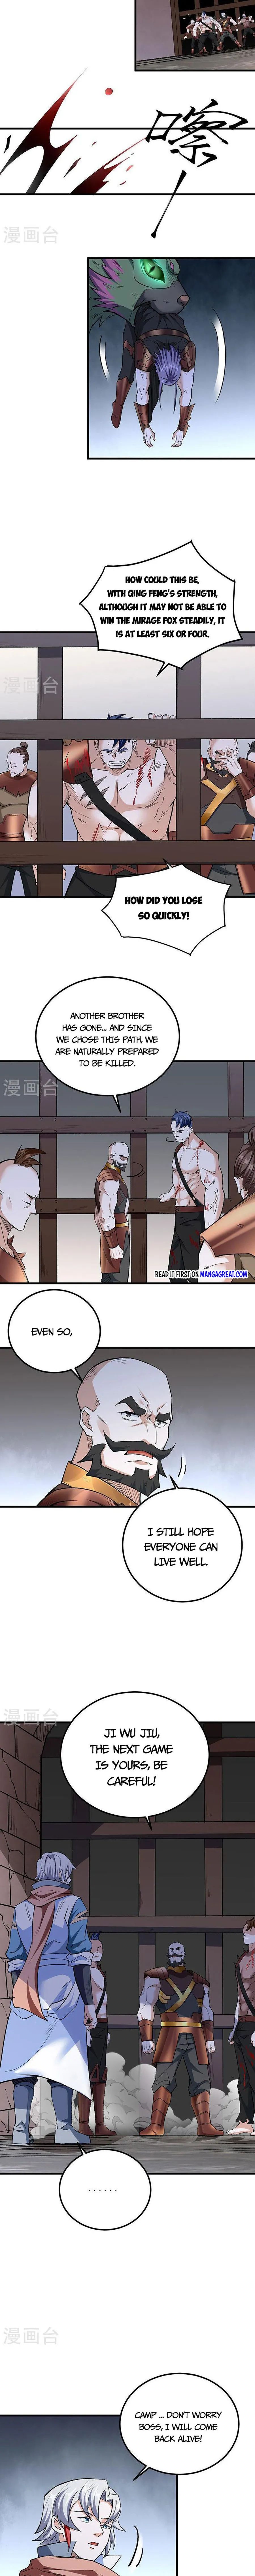 Martial Arts Reigns - Page 3